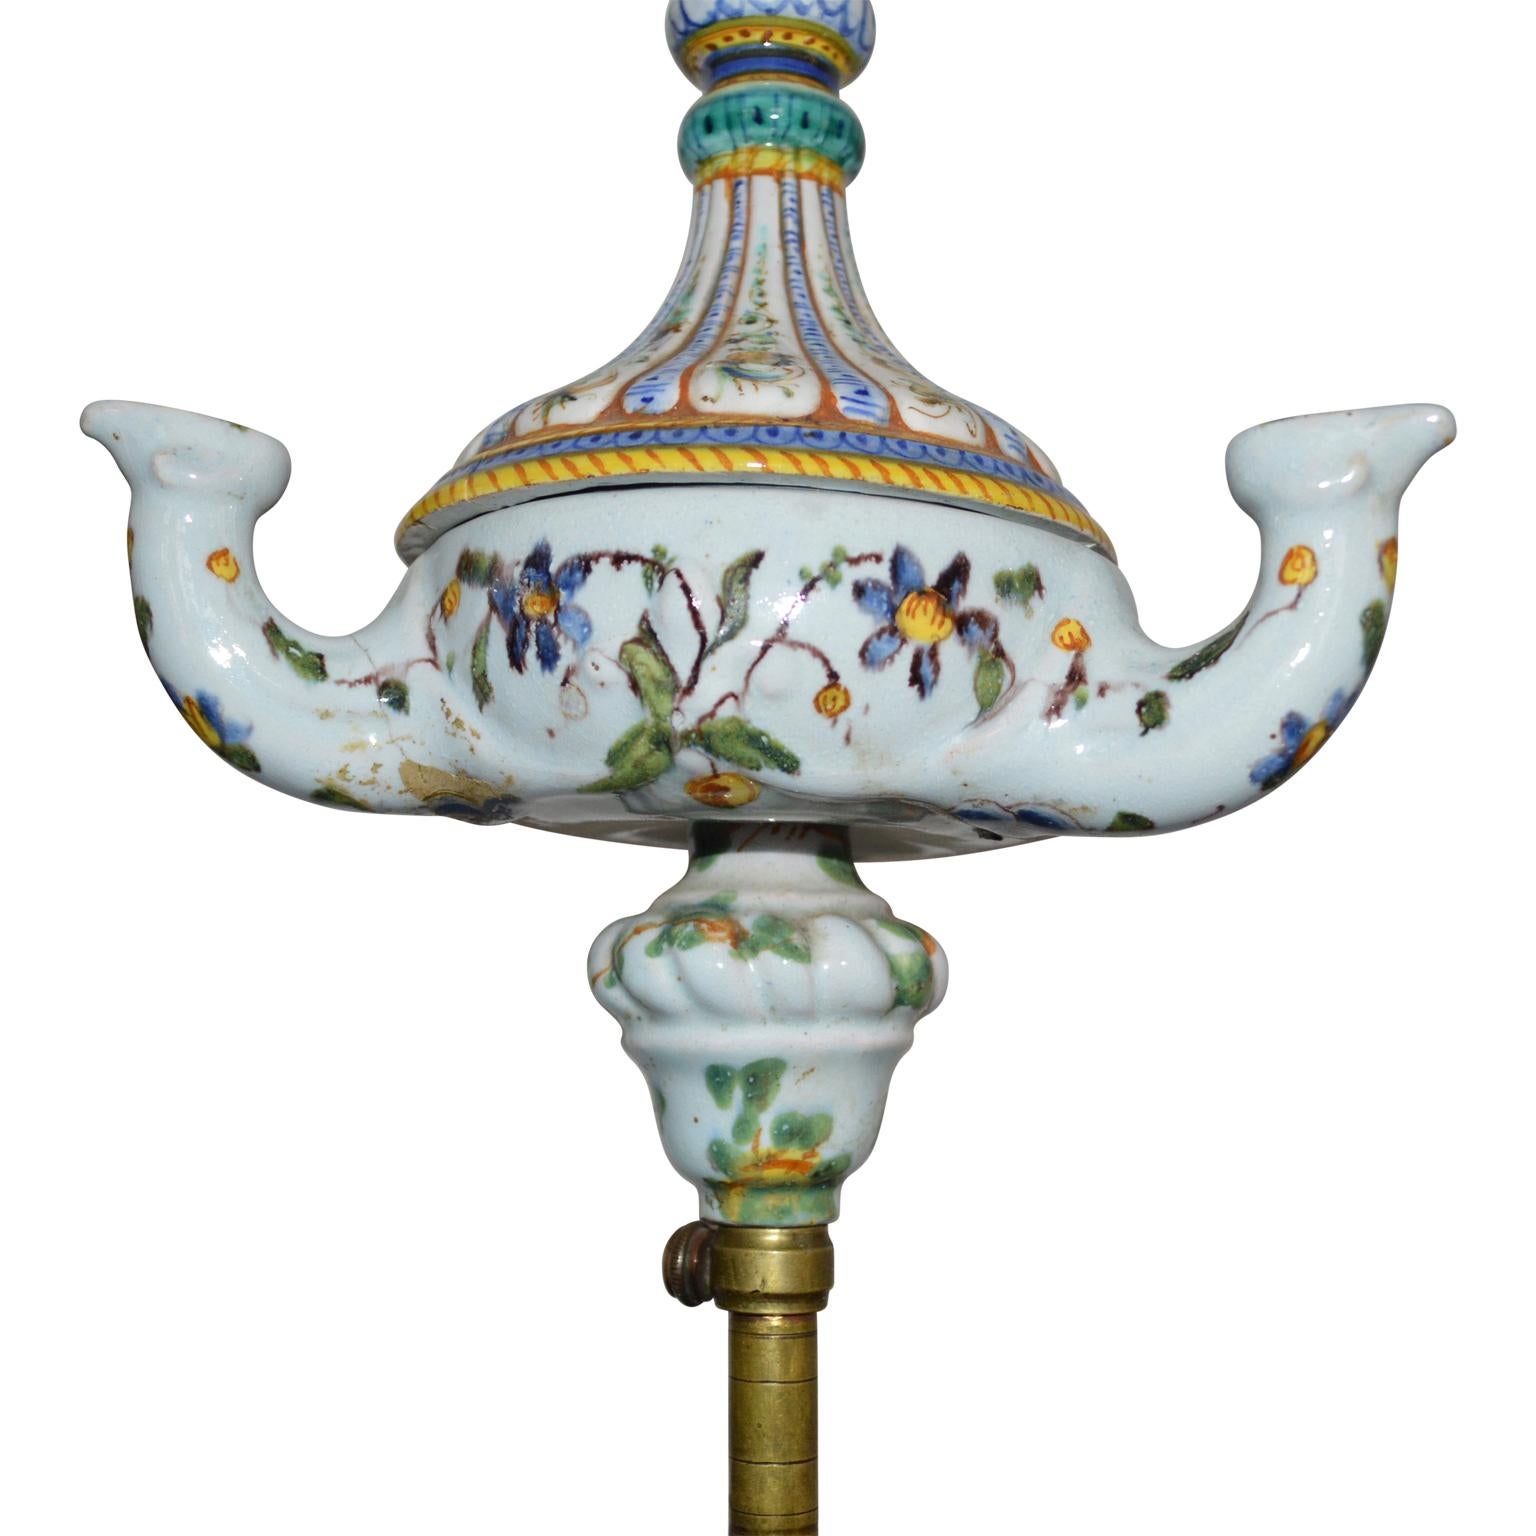 Early 19th Century Faience Table Lamp, Converted From Oil-Burning Lamp In Good Condition For Sale In Haddonfield, NJ